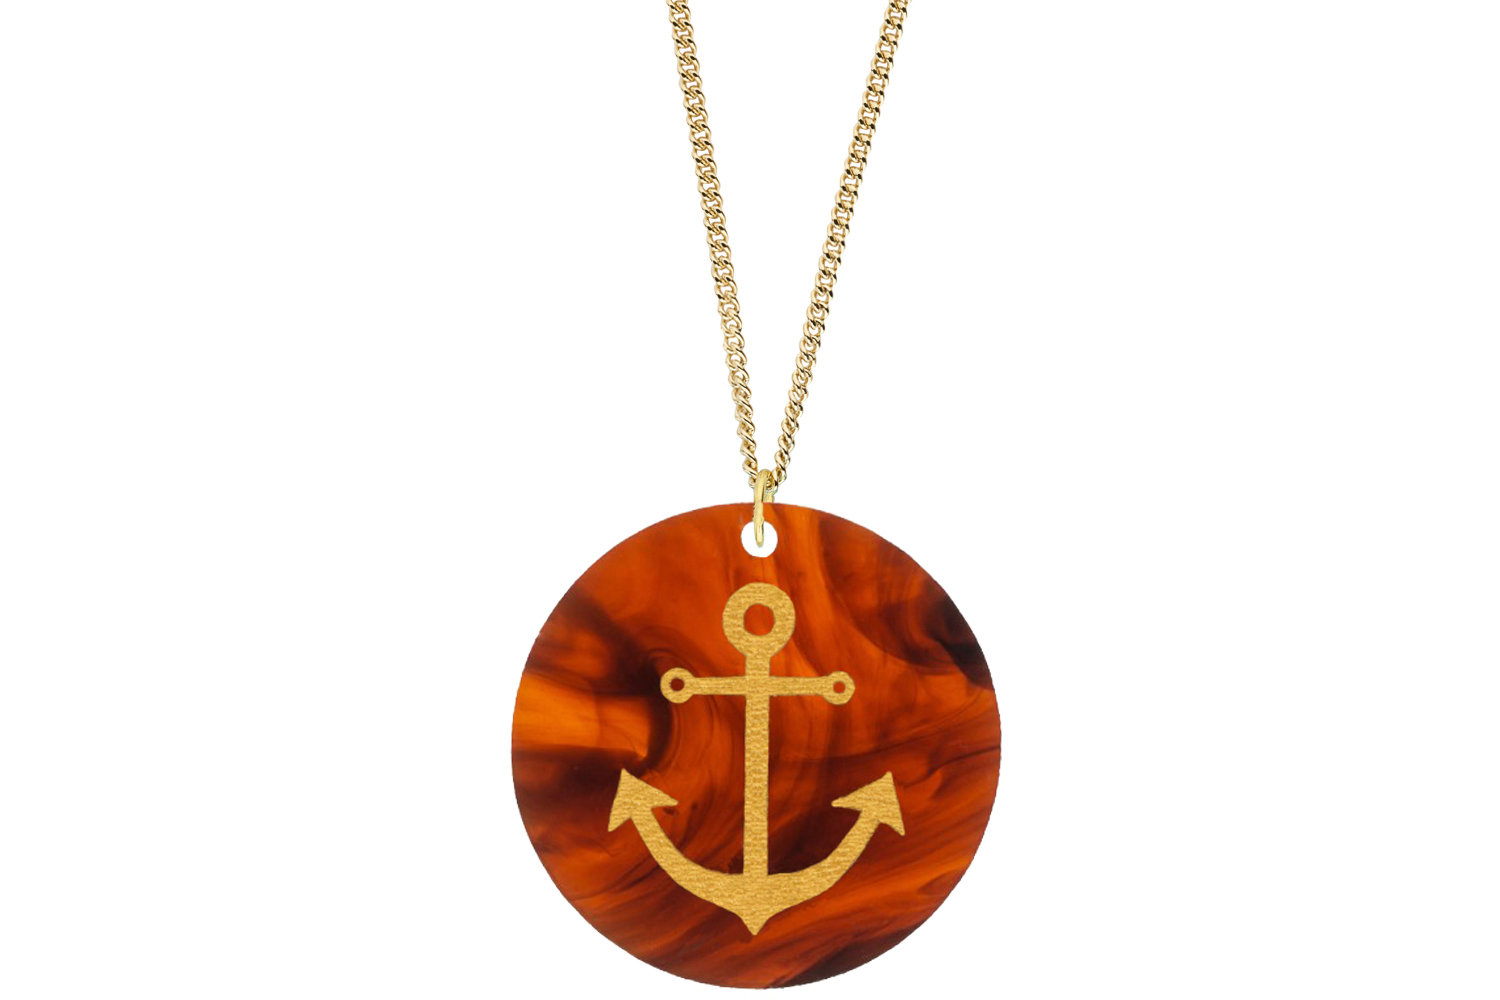 Anchor Pendant Subtle Style Refined with Paint on Chain Necklace